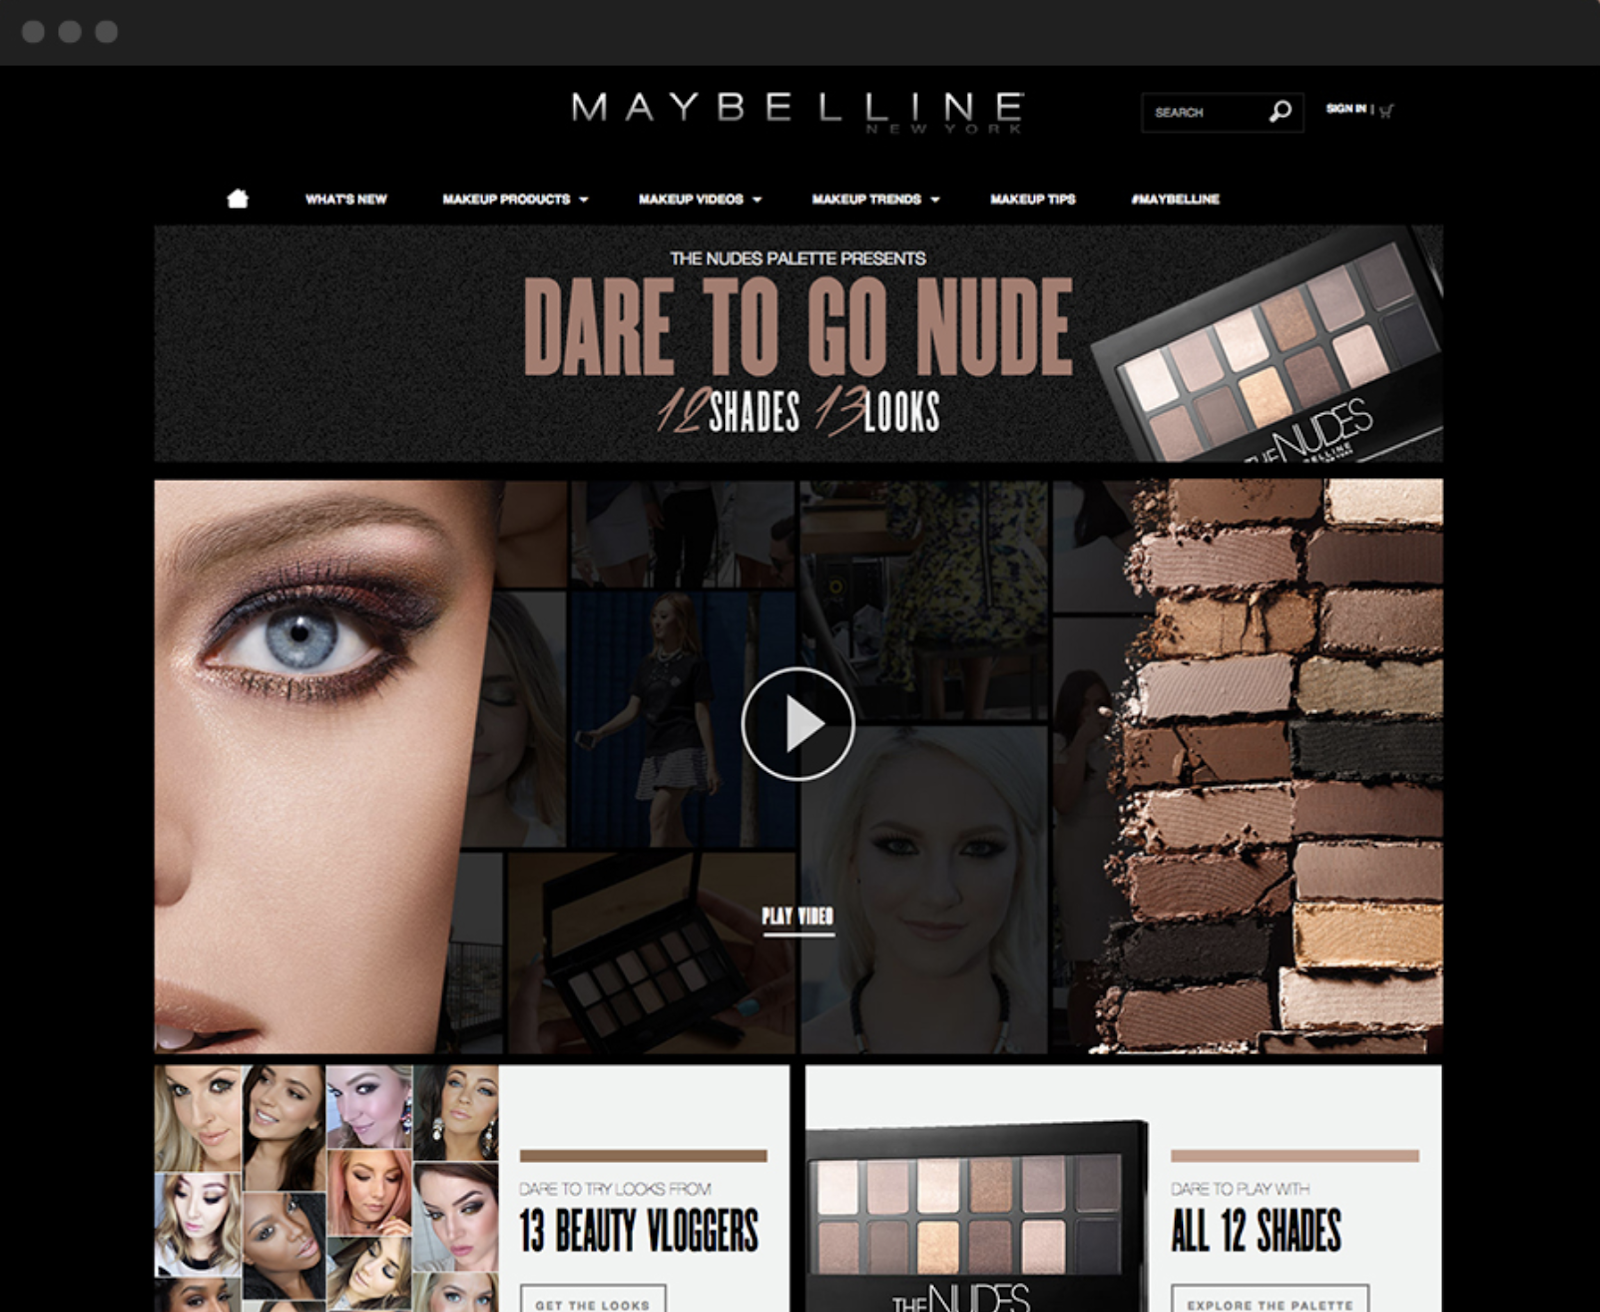 Maybelline nude makeup campaign features dramatic eyeshadow